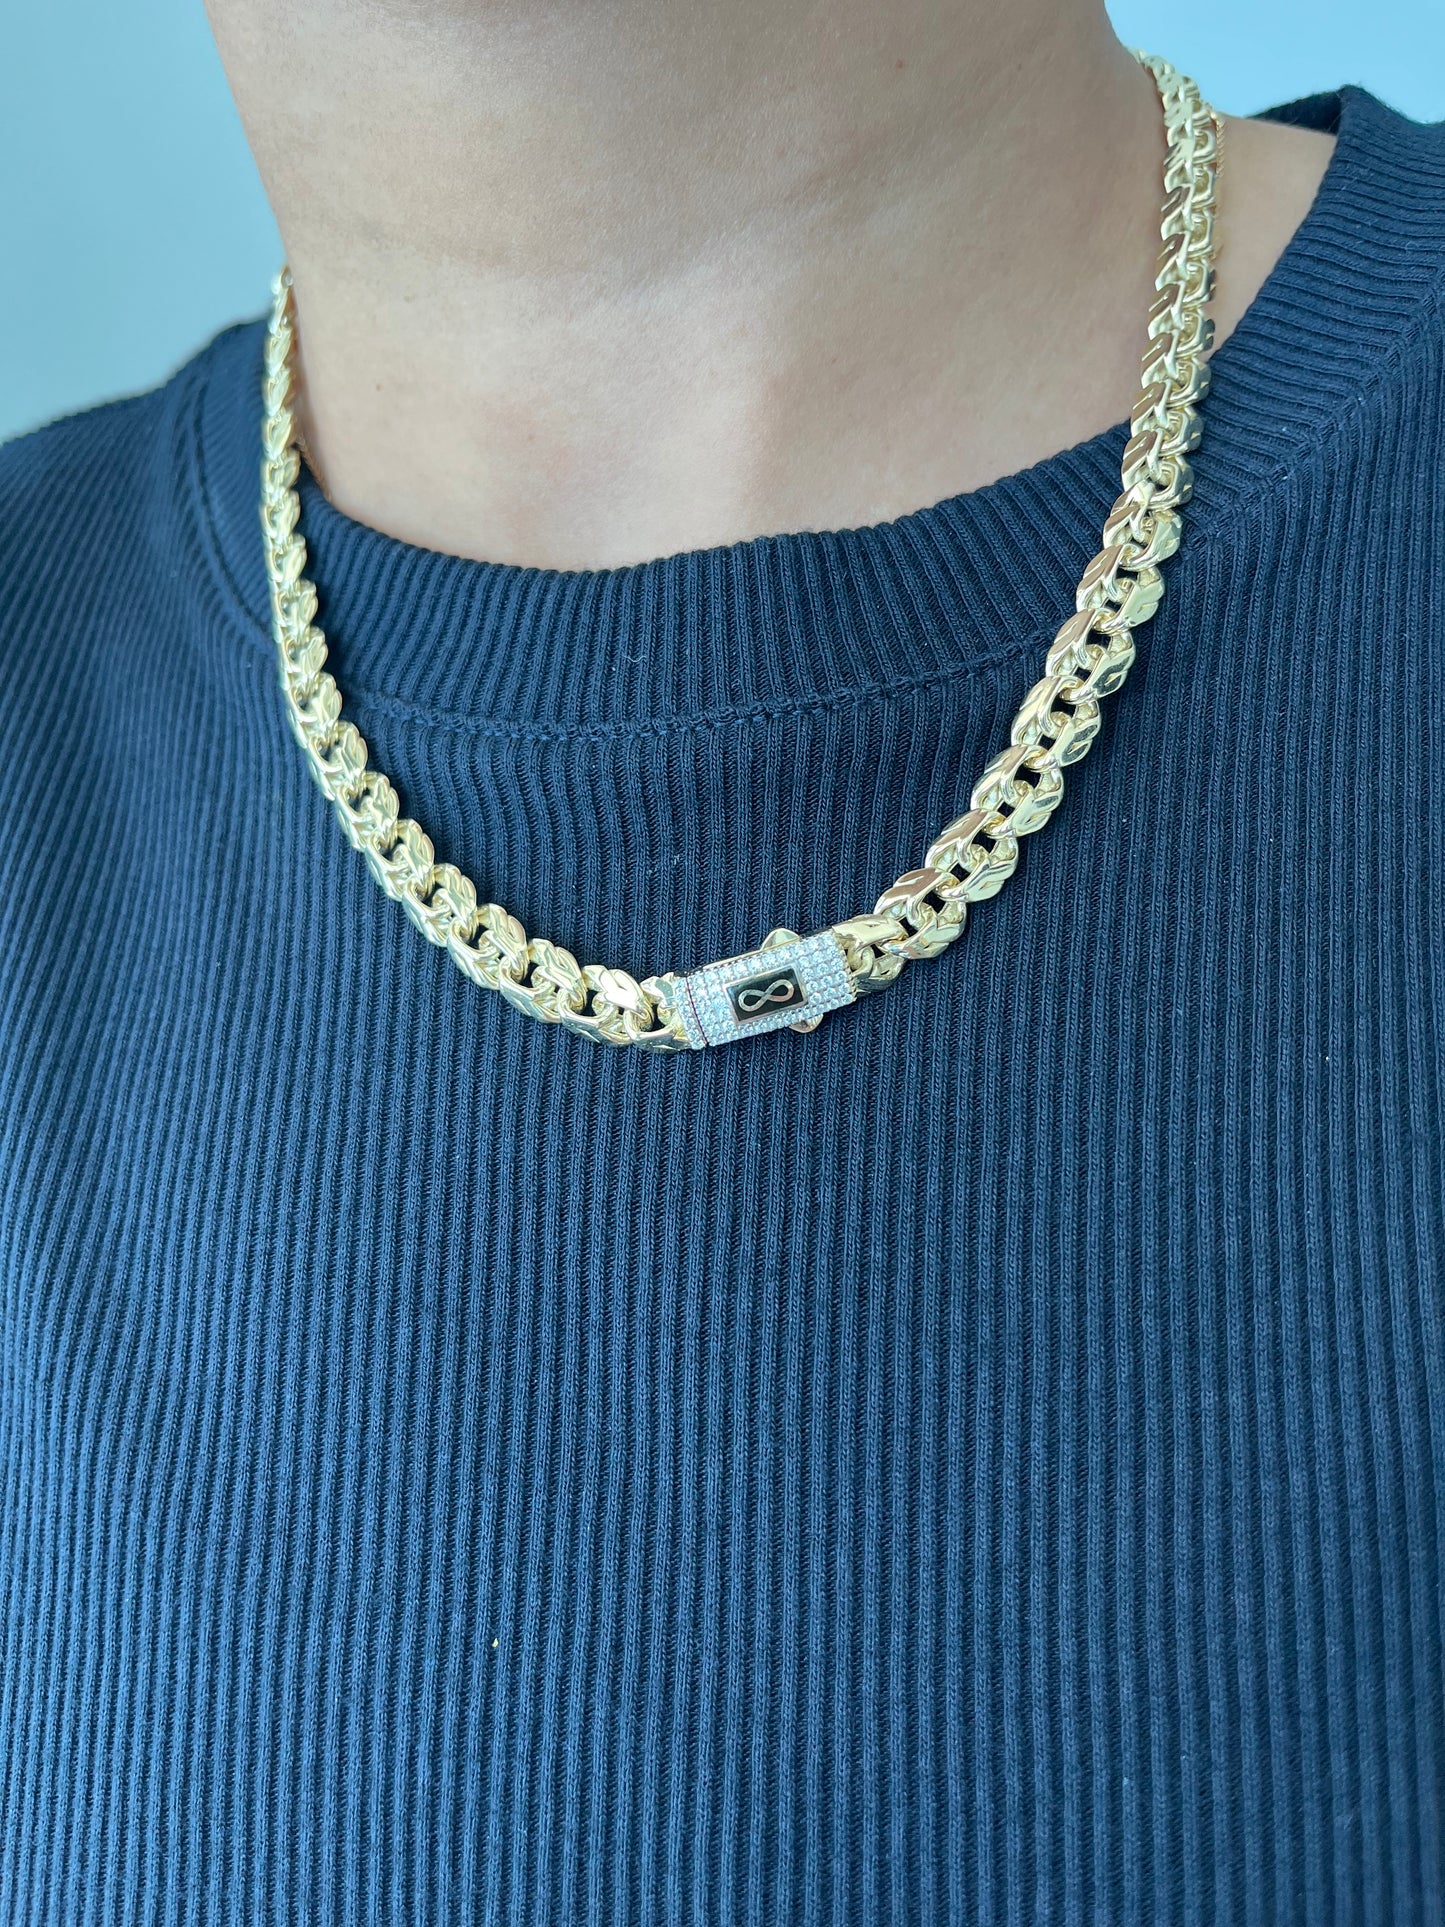 10K 8.5mm Chino Chain Necklace